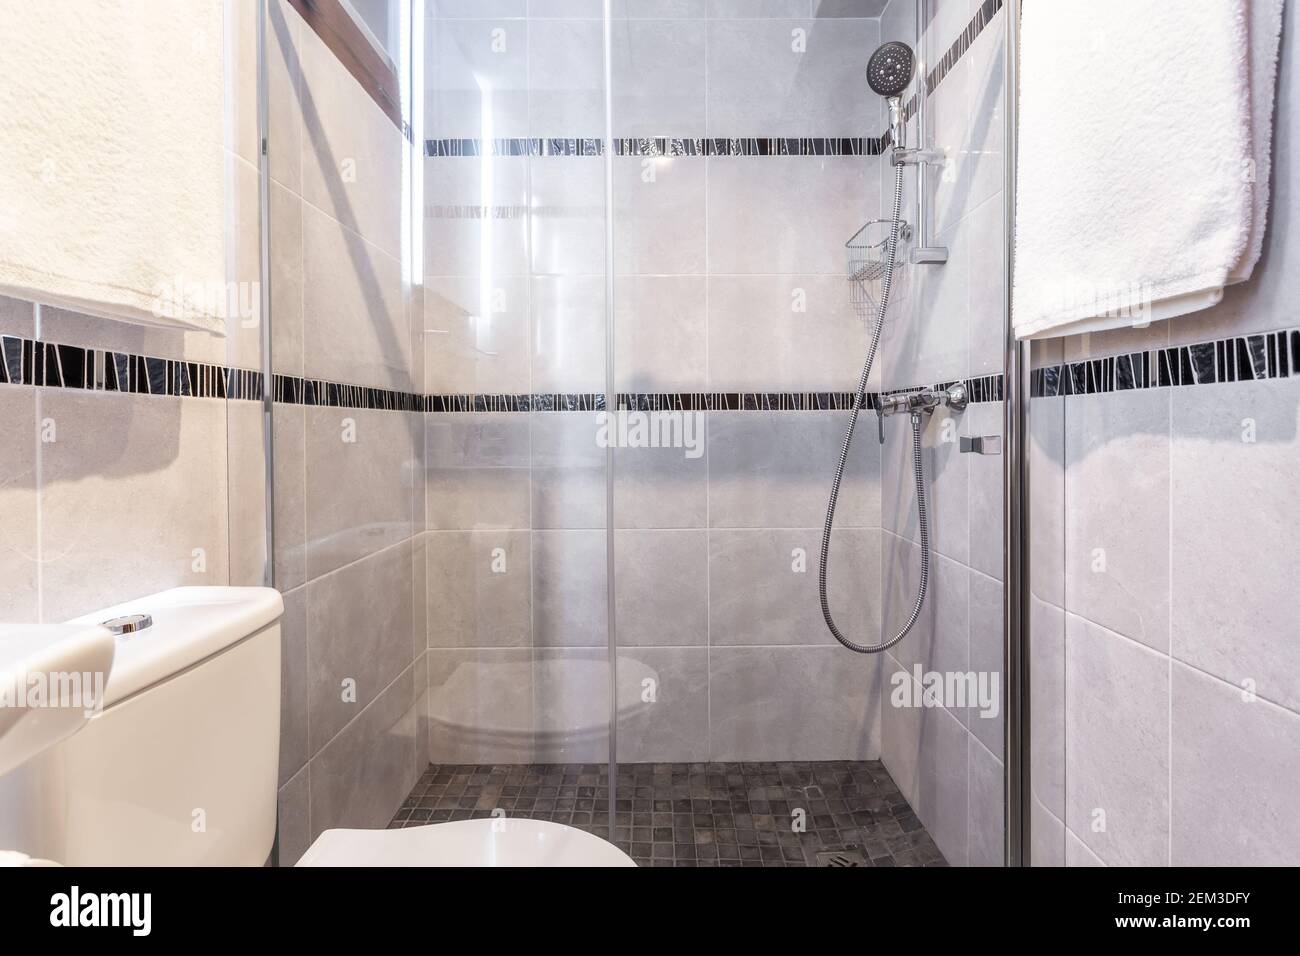 Shot of modern bathroom with a clean shower set up, towels hanging on the walls and a gimplse of the toilet seat. Stock Photo